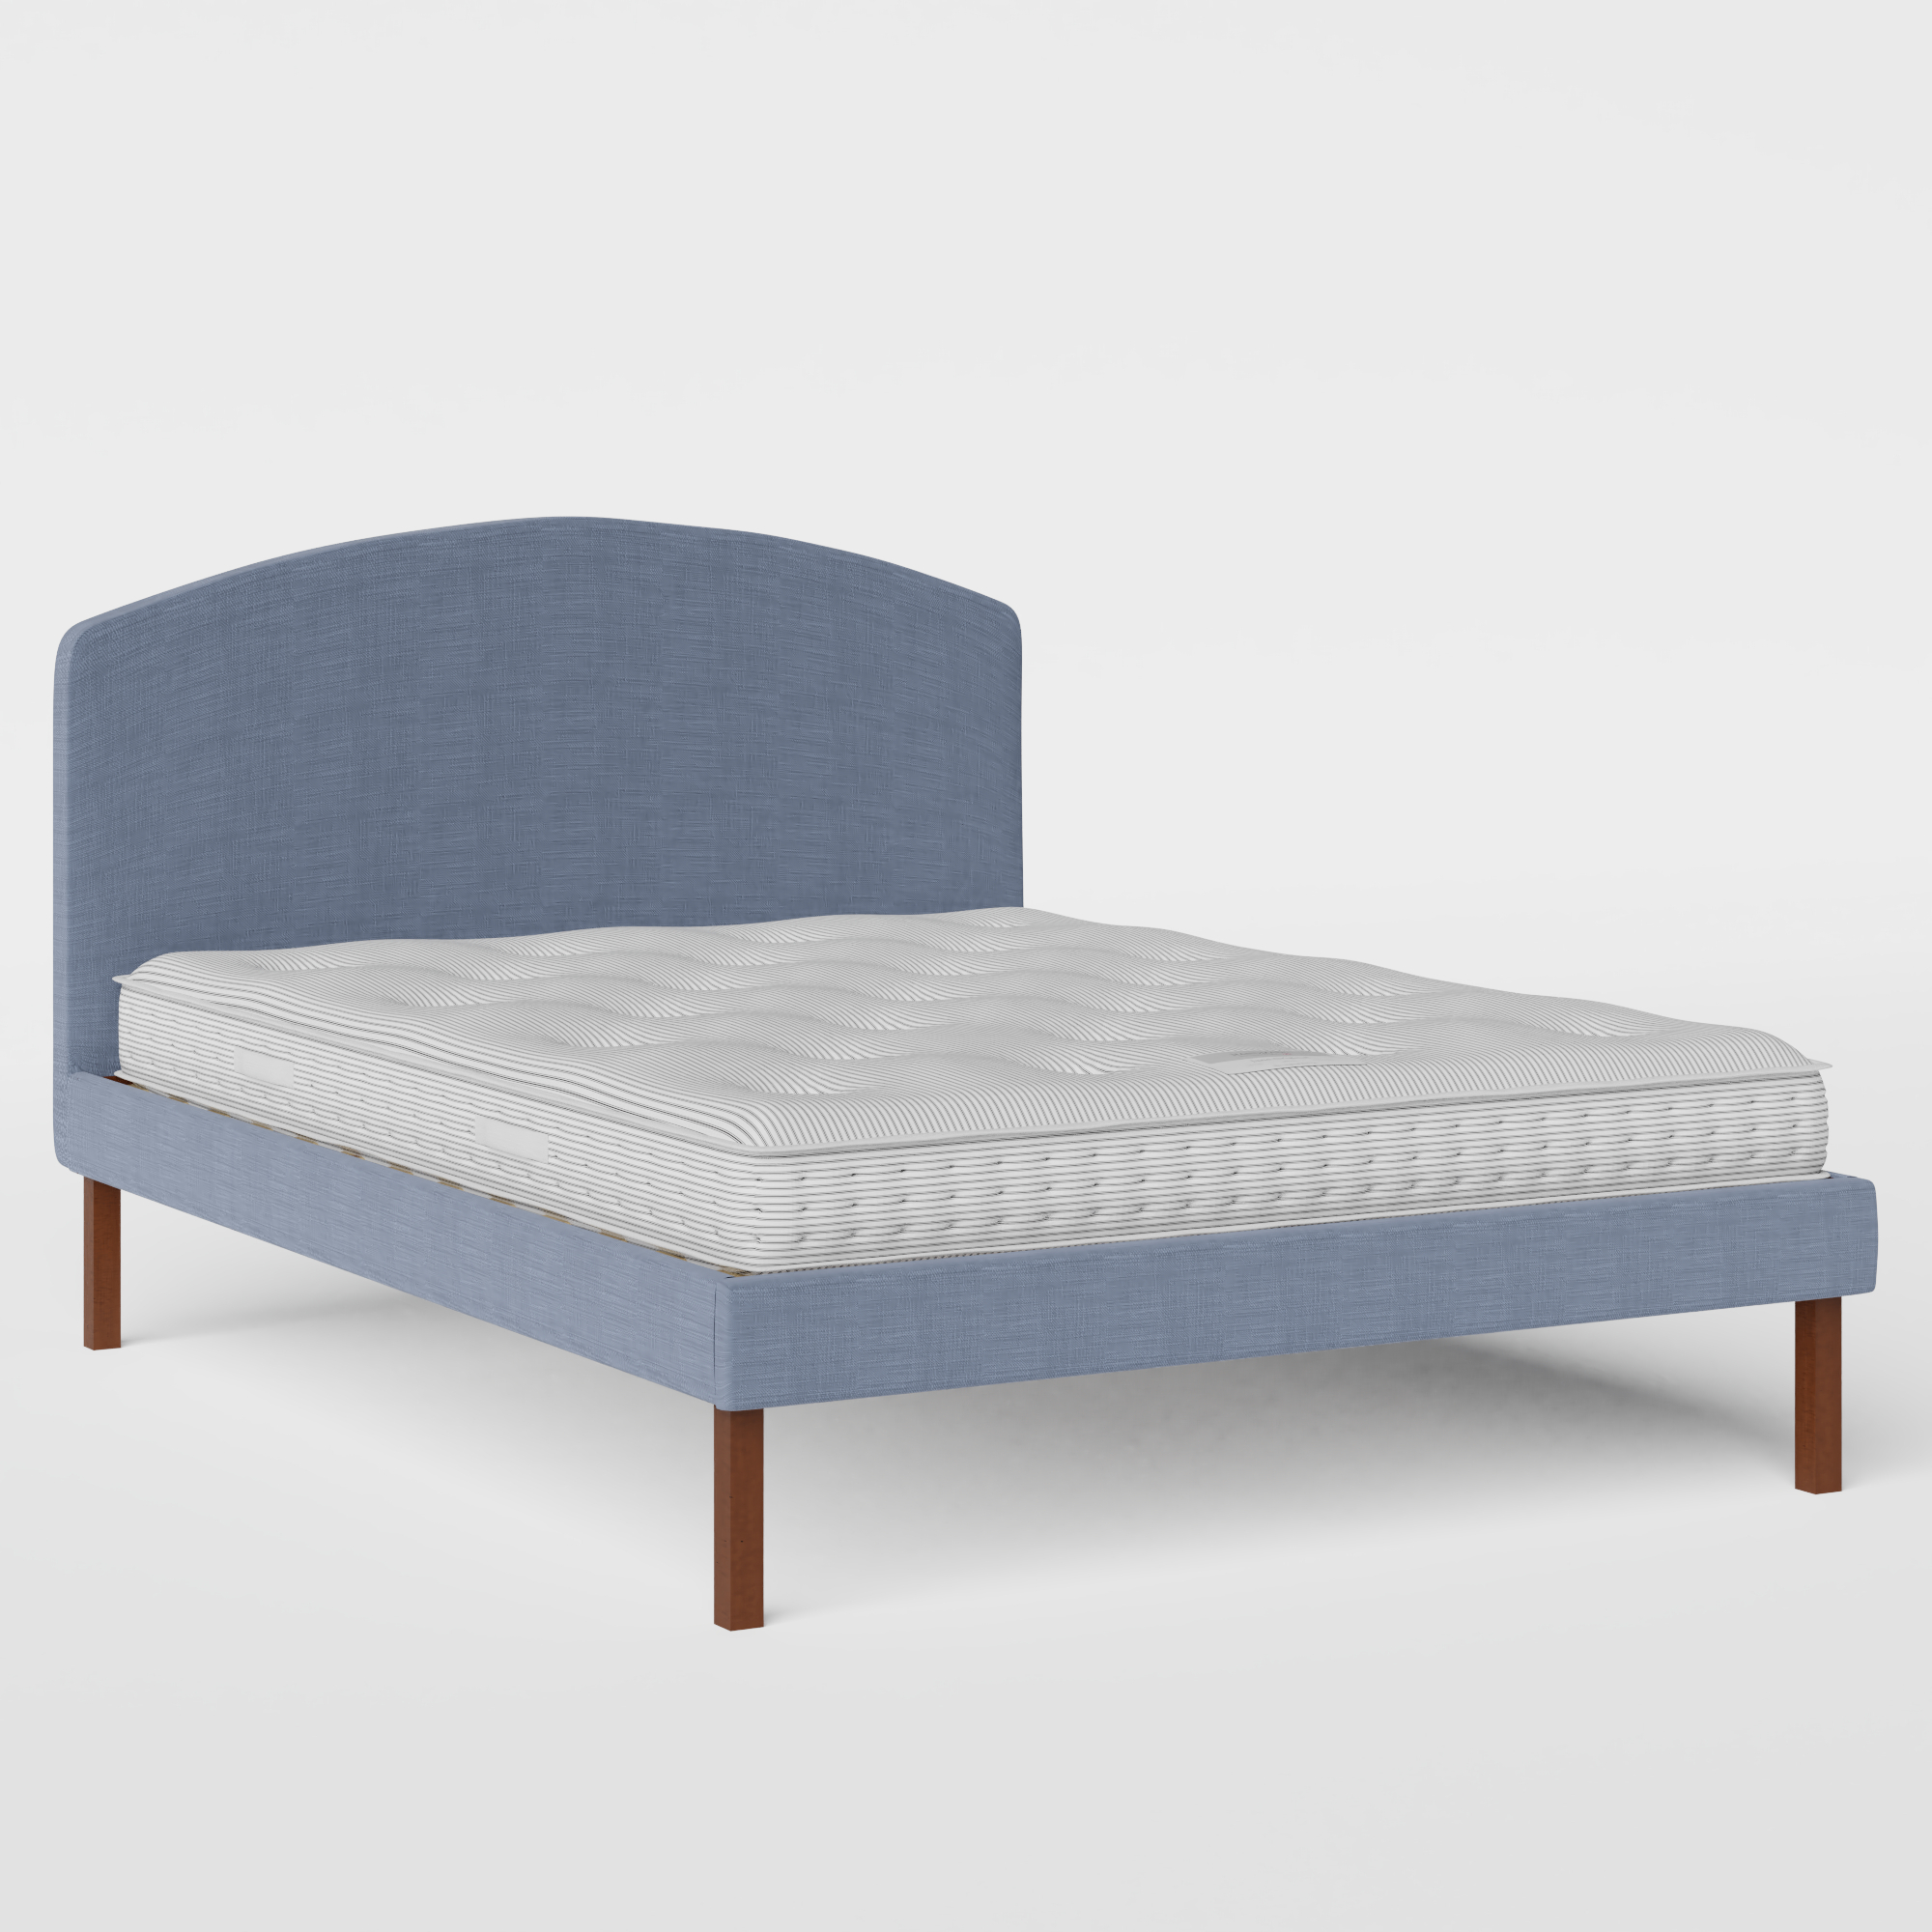 Okawa Upholstered upholstered bed in blue fabric